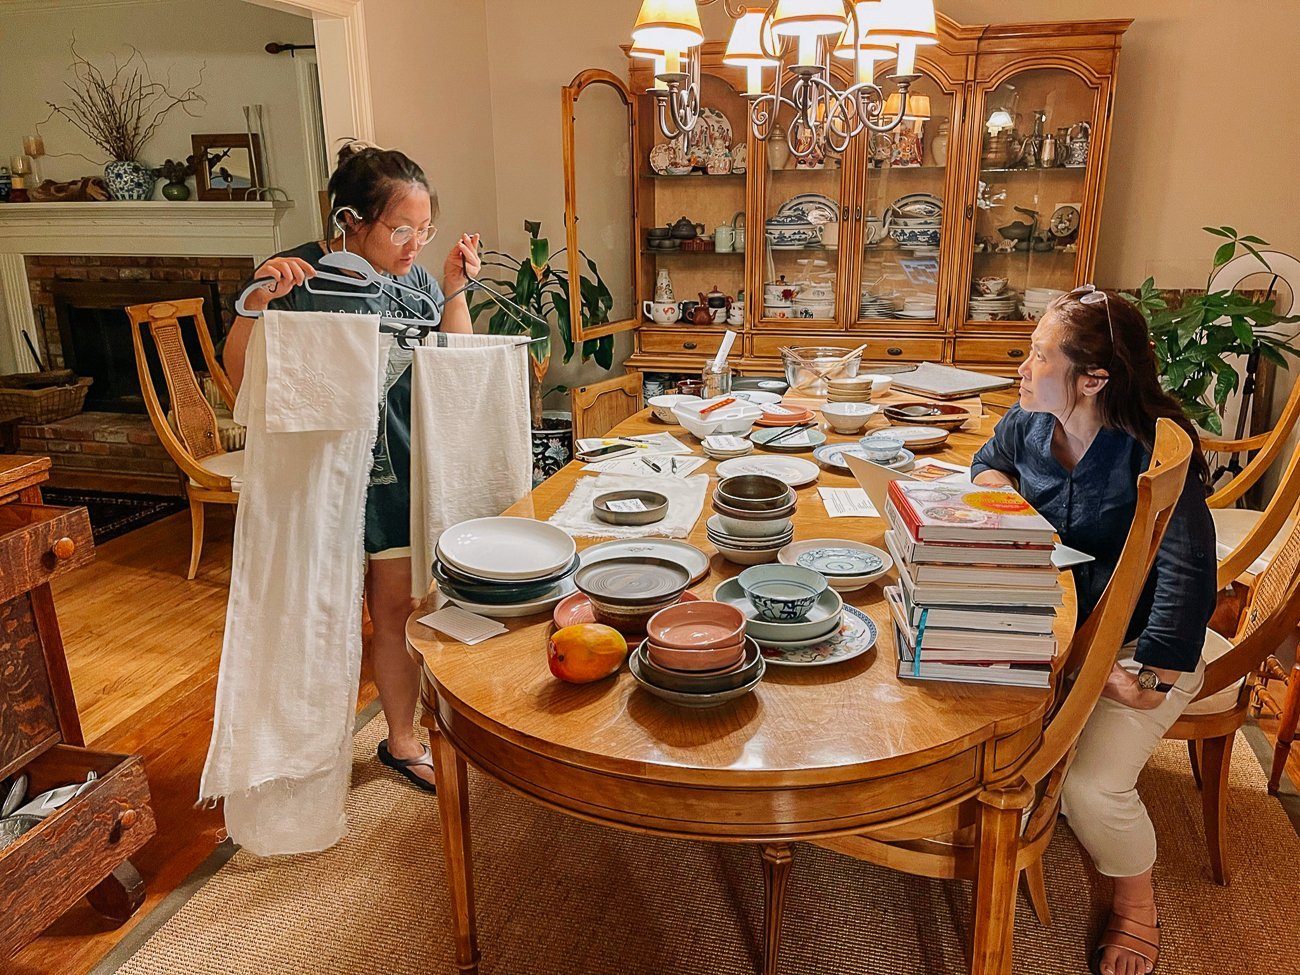 Kaitlin reviewing cookbook props